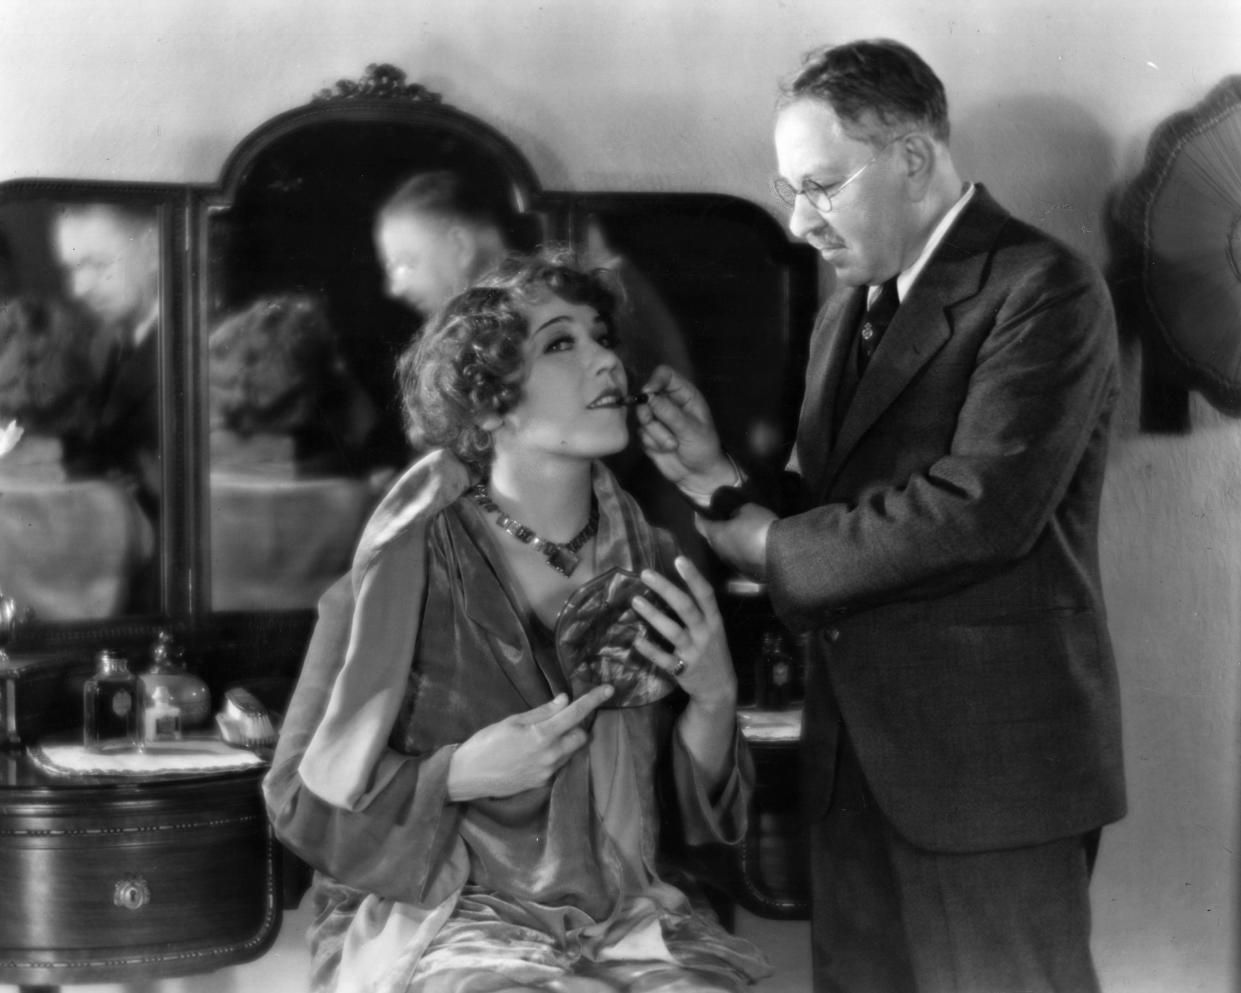 Louise Fazenda (1895 - 1962), the Hollywood film star and actress, is shown by 'the' Max Factor (1904 - 1996) how to apply lipstick